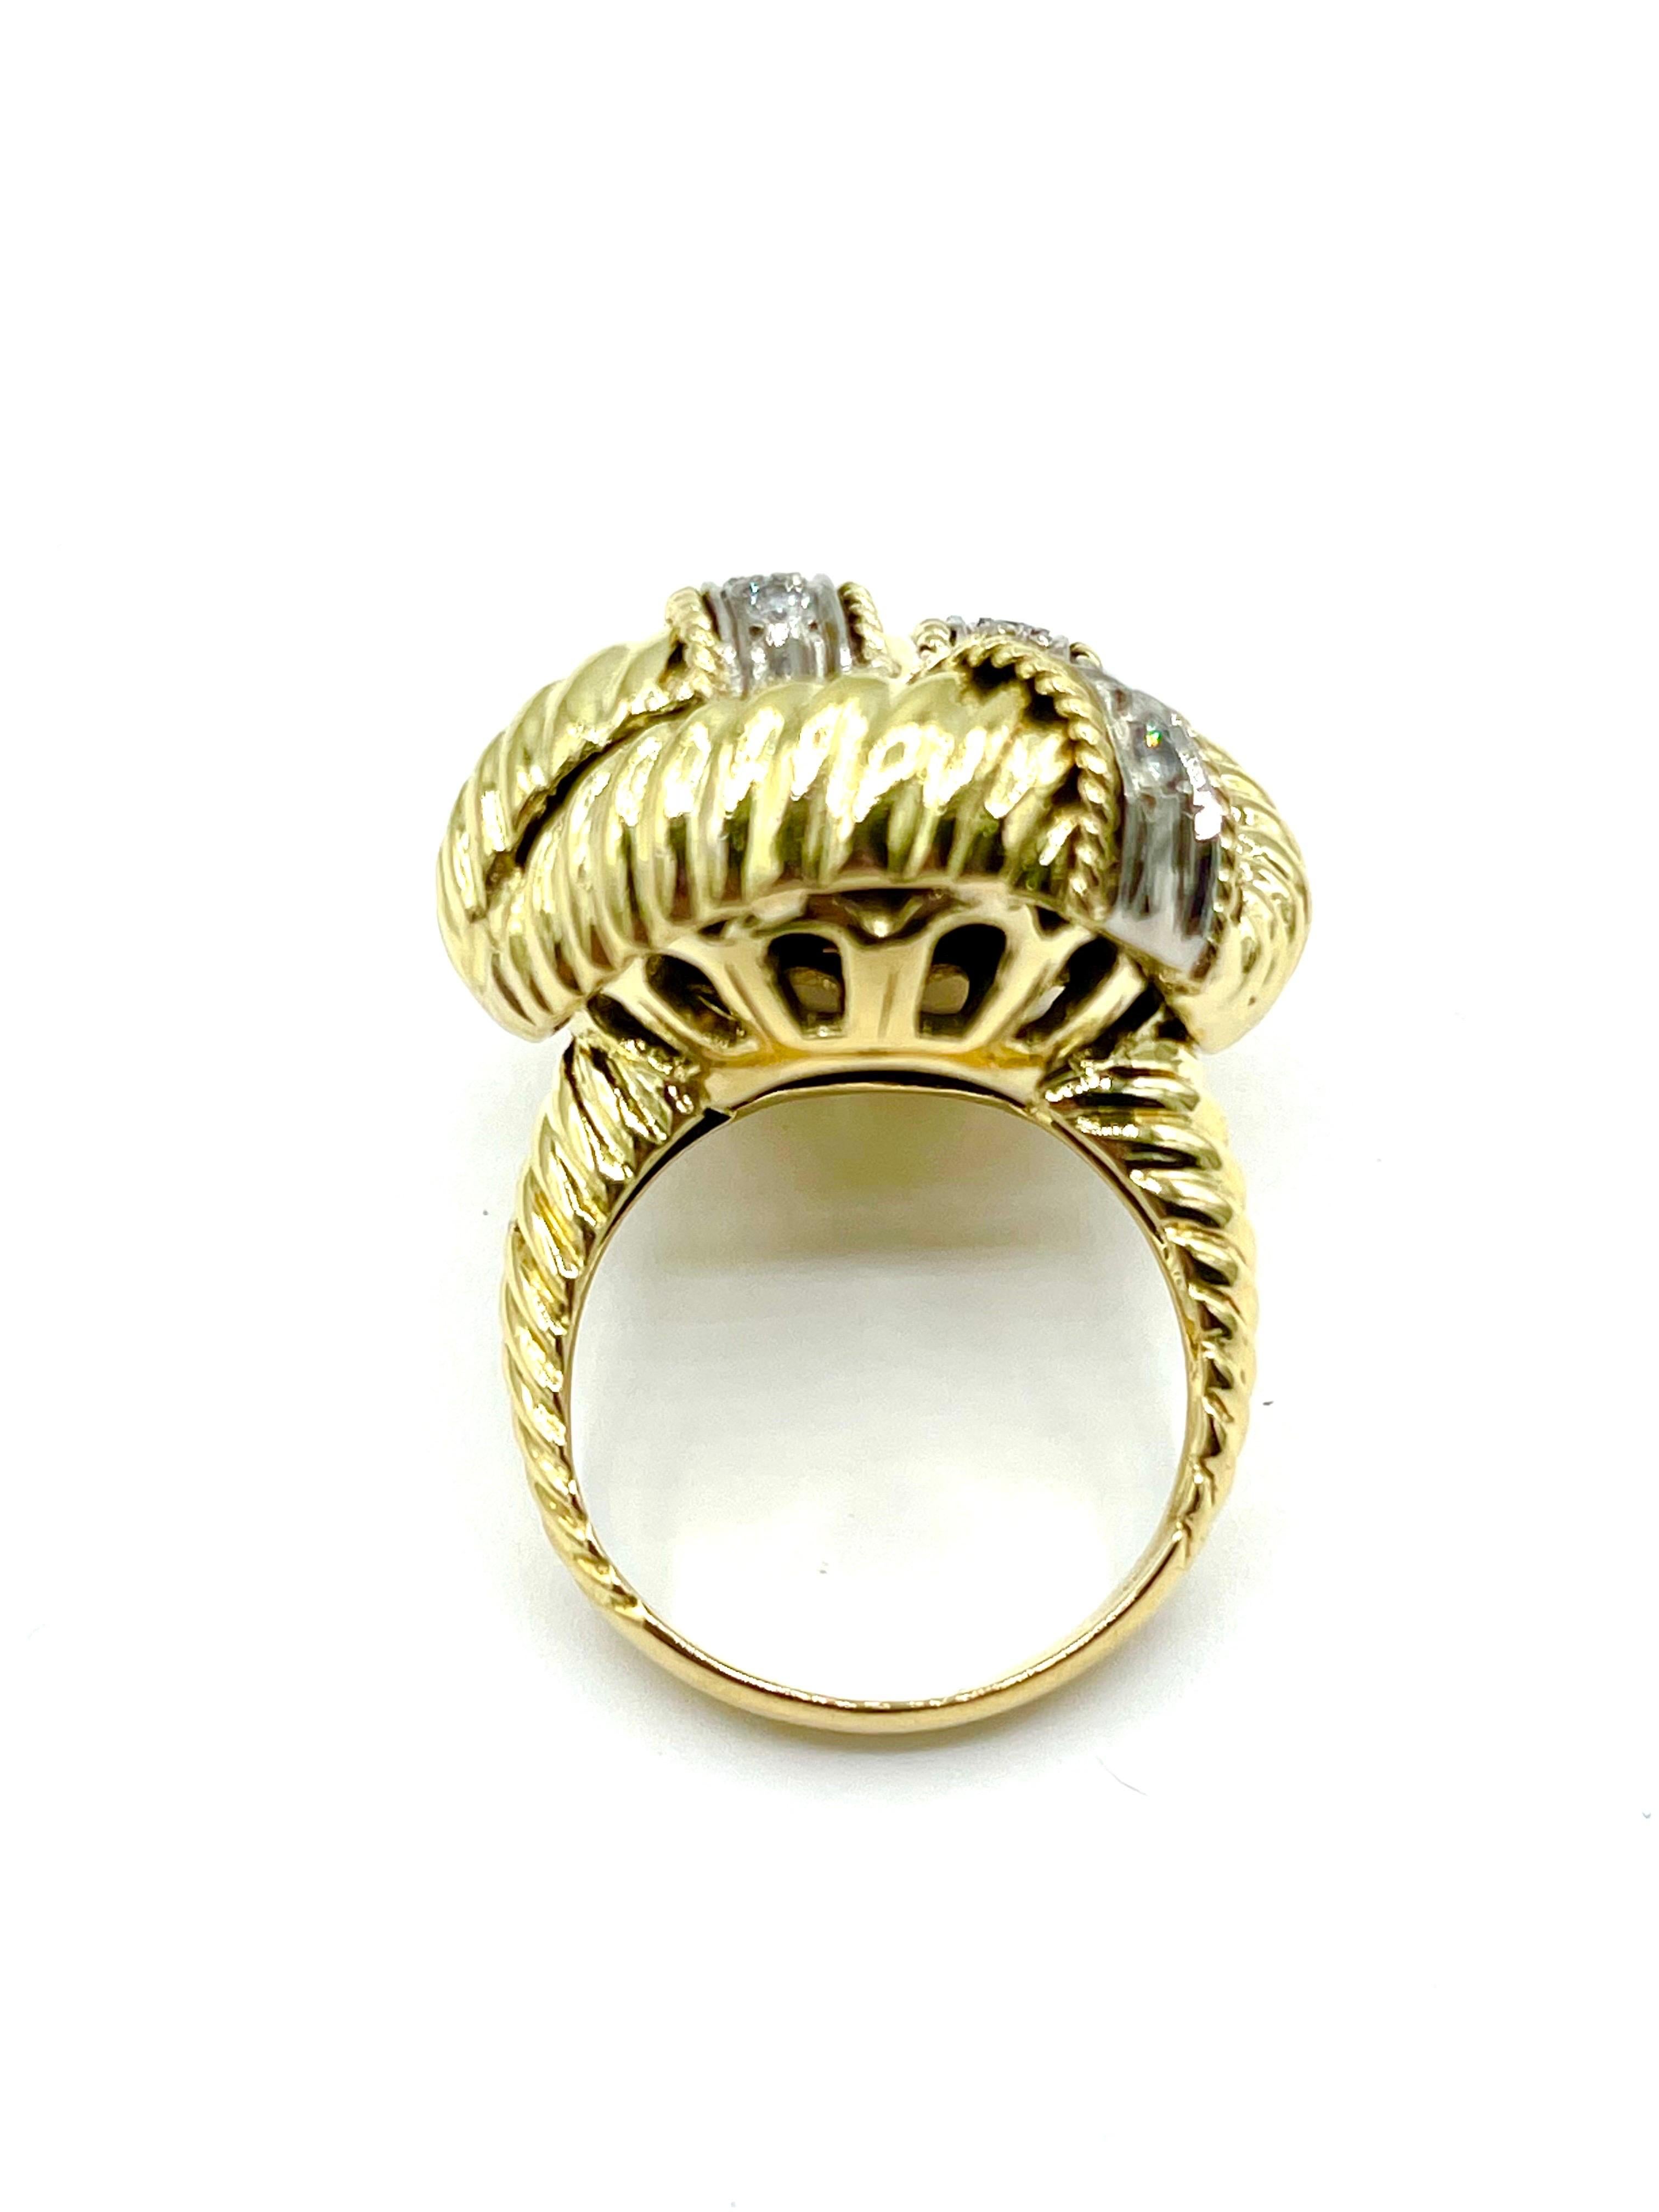 0.48 Carat Round Brilliant Diamond and 18K Yellow Gold Knot Cocktail Ring For Sale 1